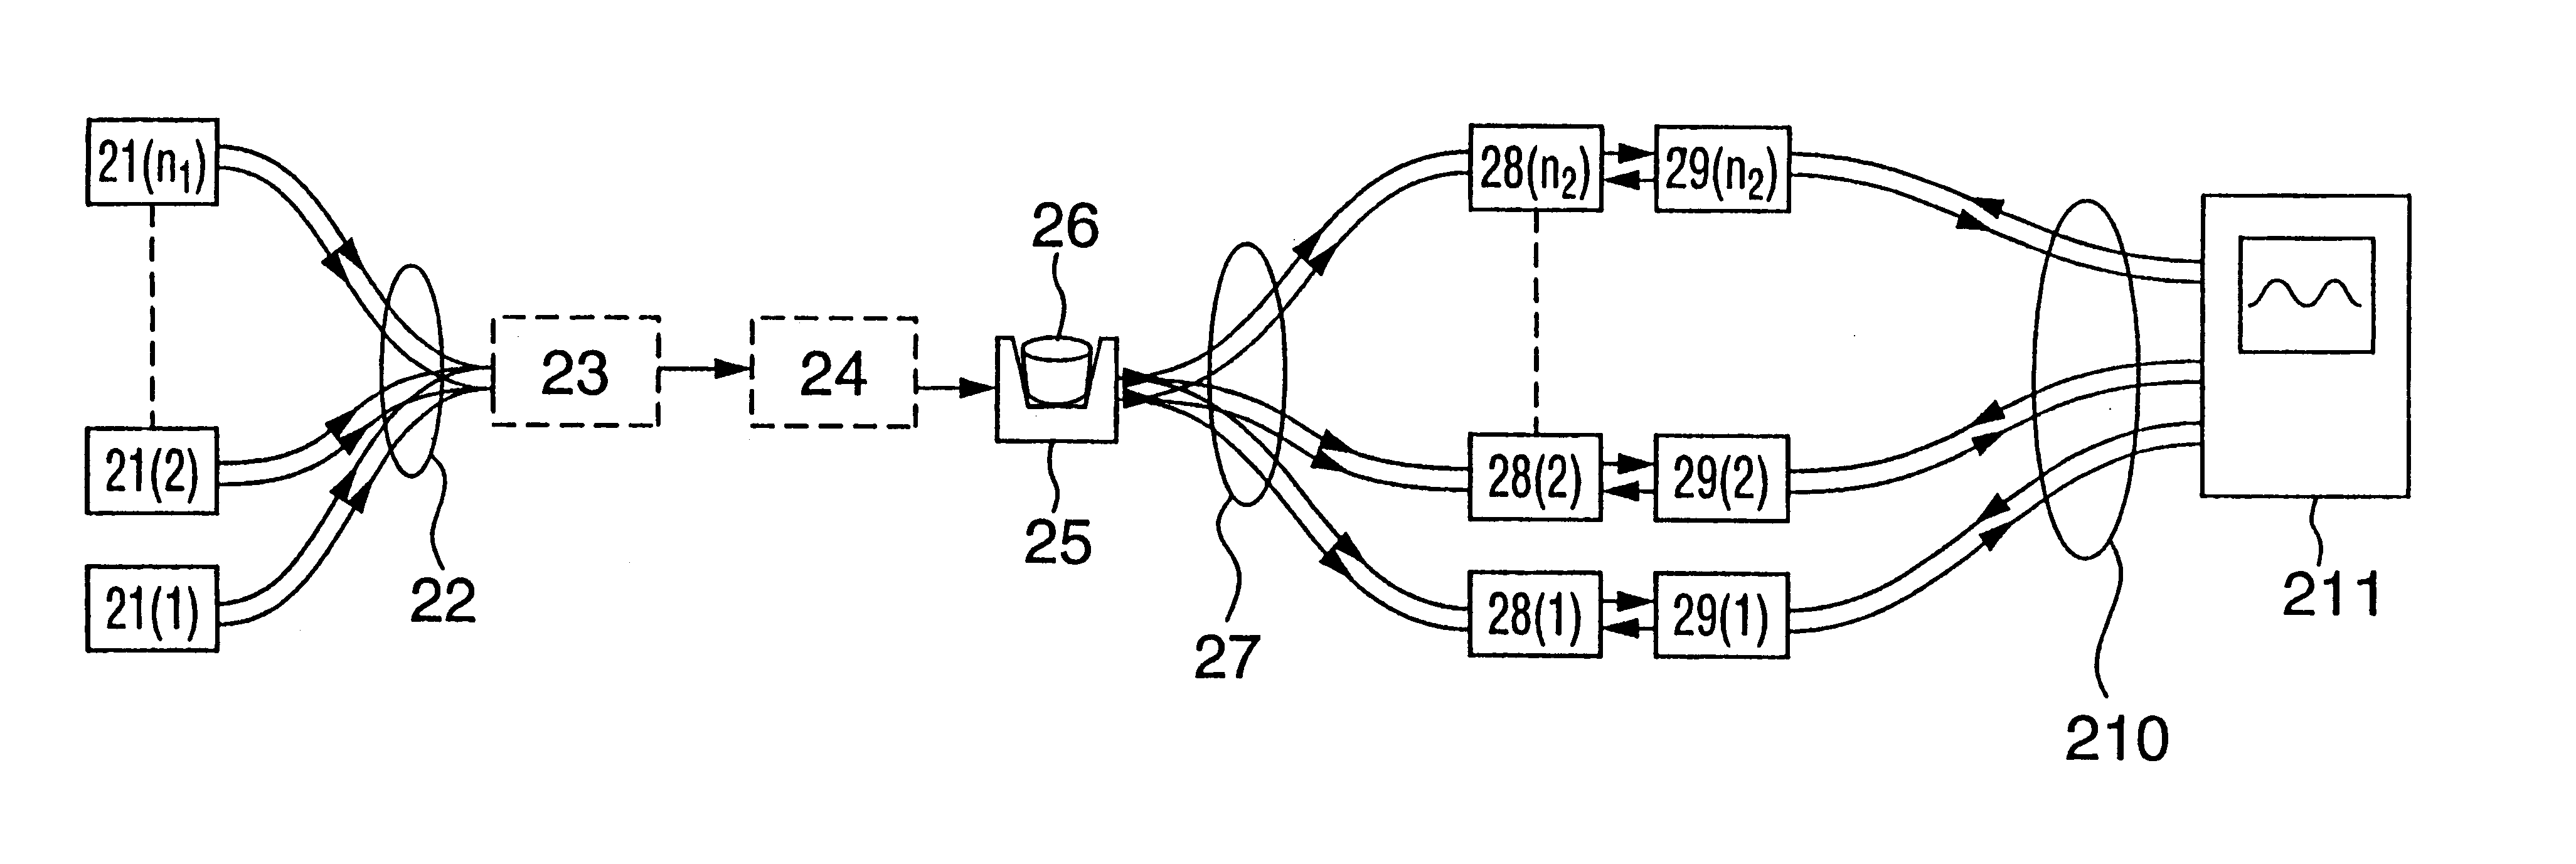 Method for determination of analytes using near infrared, adjacent visible spectrum and an array of longer near infrared wavelengths